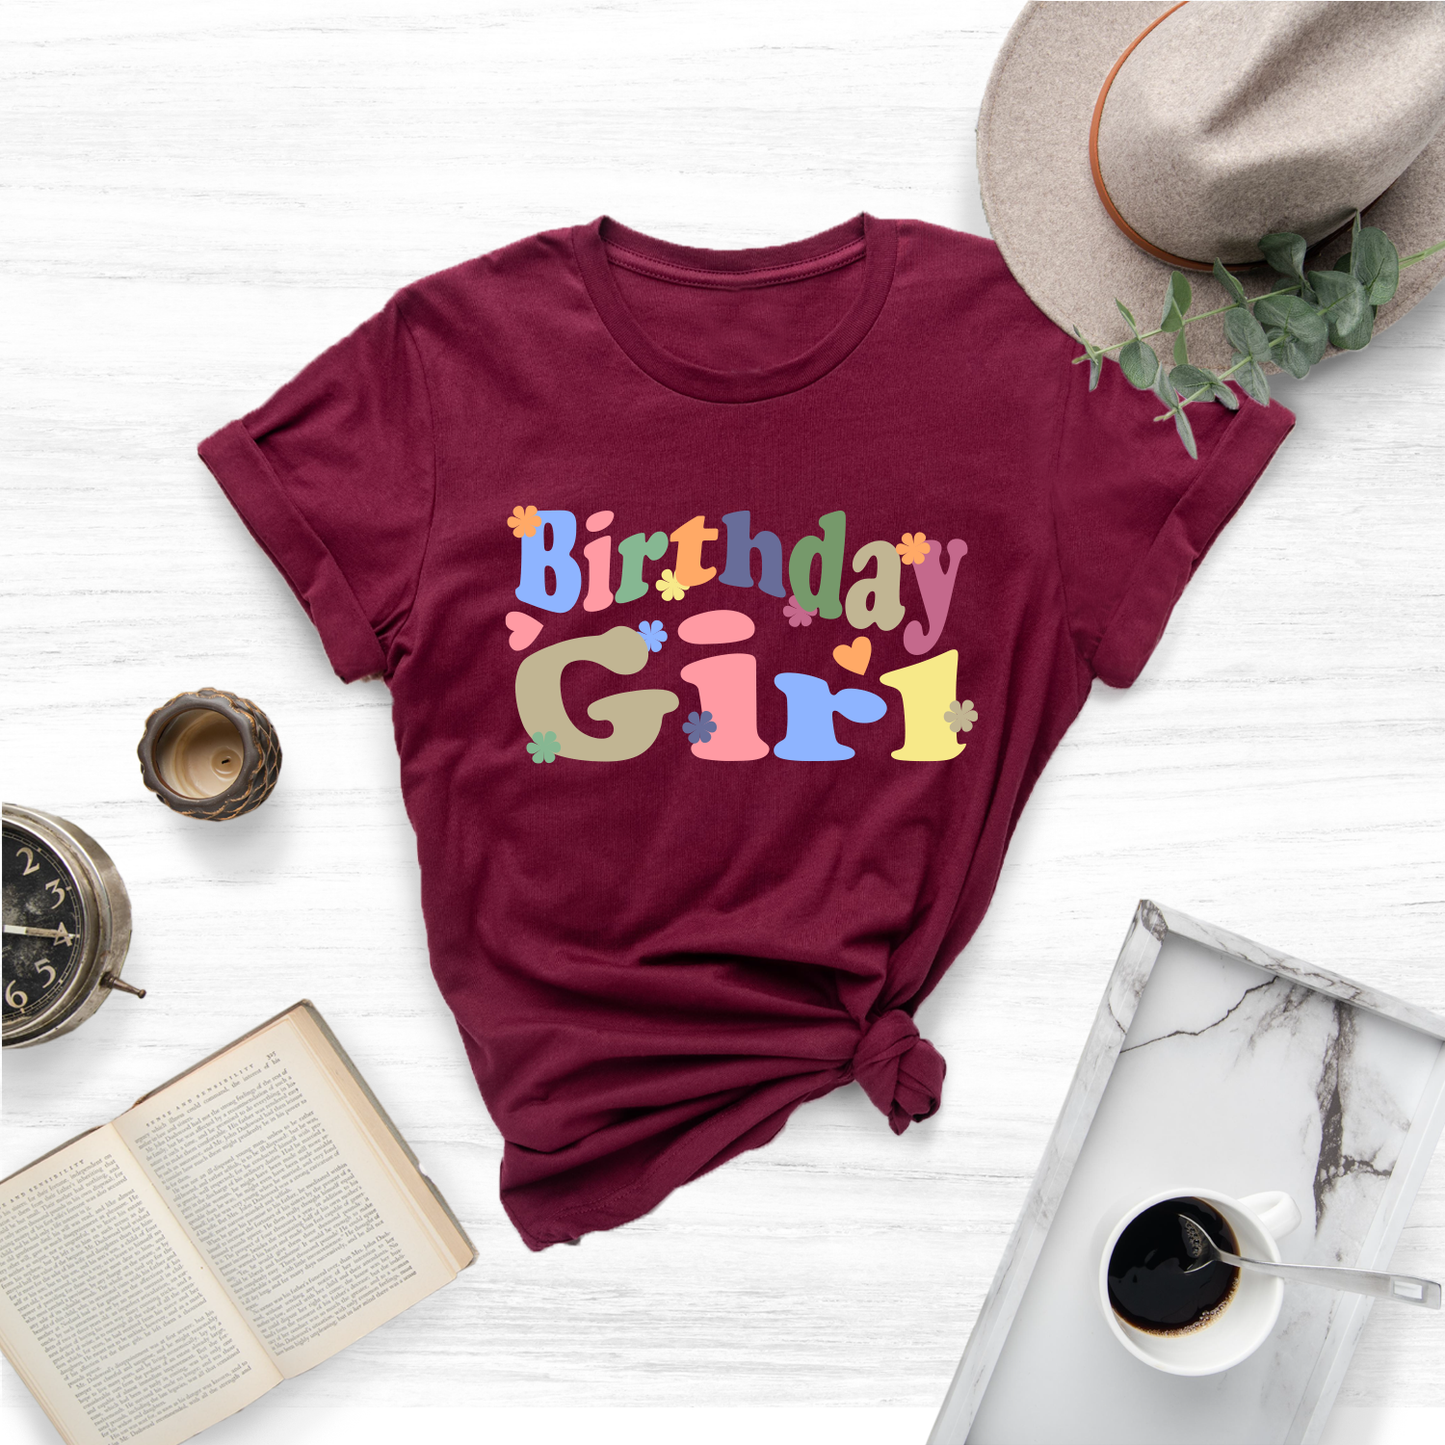 Grab this adorable retro birthday shirt and celebrate her special day in style